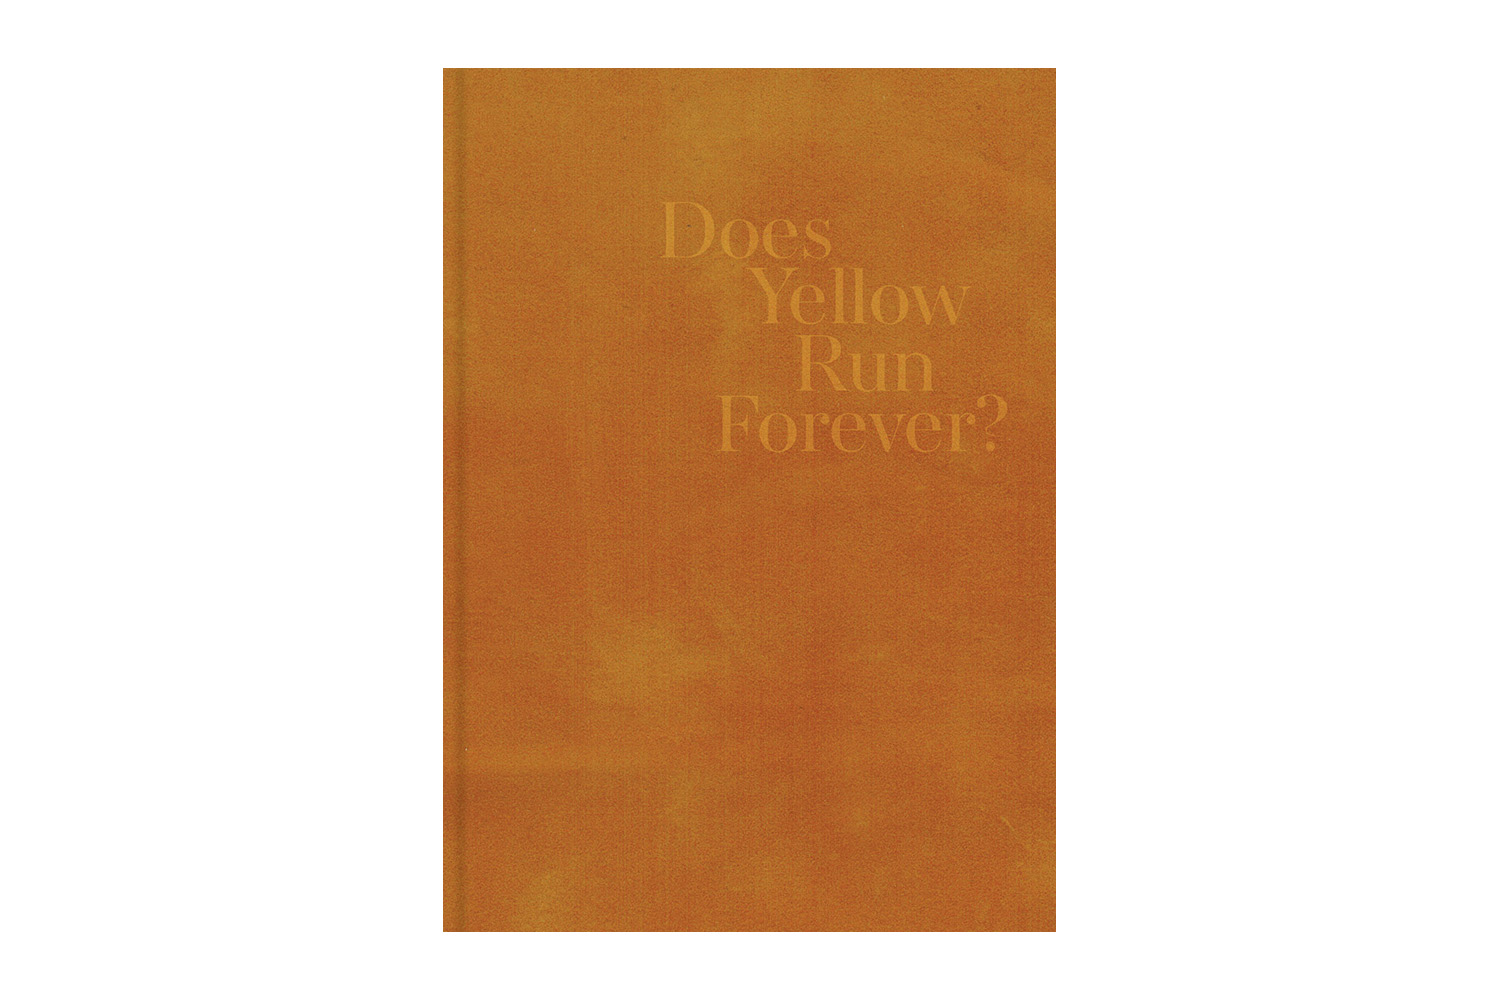 Paul Graham's Does Yellow Run Forever? published by MACK
                              Rainbows, riches and daydreams are the visual focus of Paul Graham's latest book, but the images as a whole tell a more complicated story about what we value in life, and the unexpected places we find it.